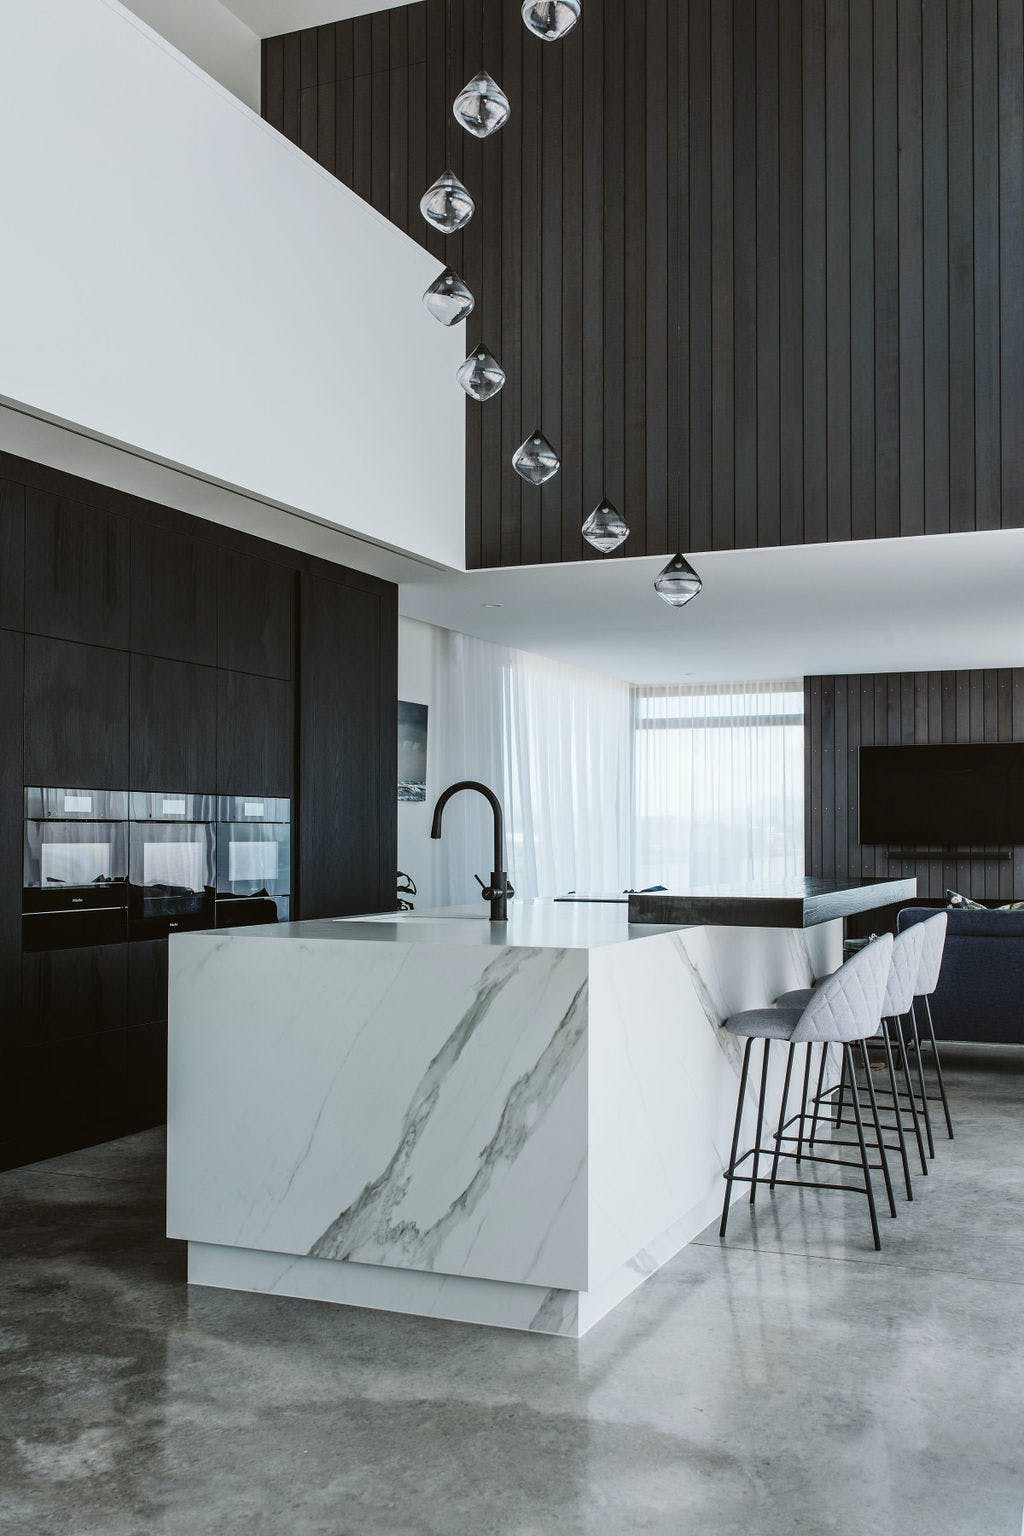 The luxury of natural stone: marble-look finishes are back on trend